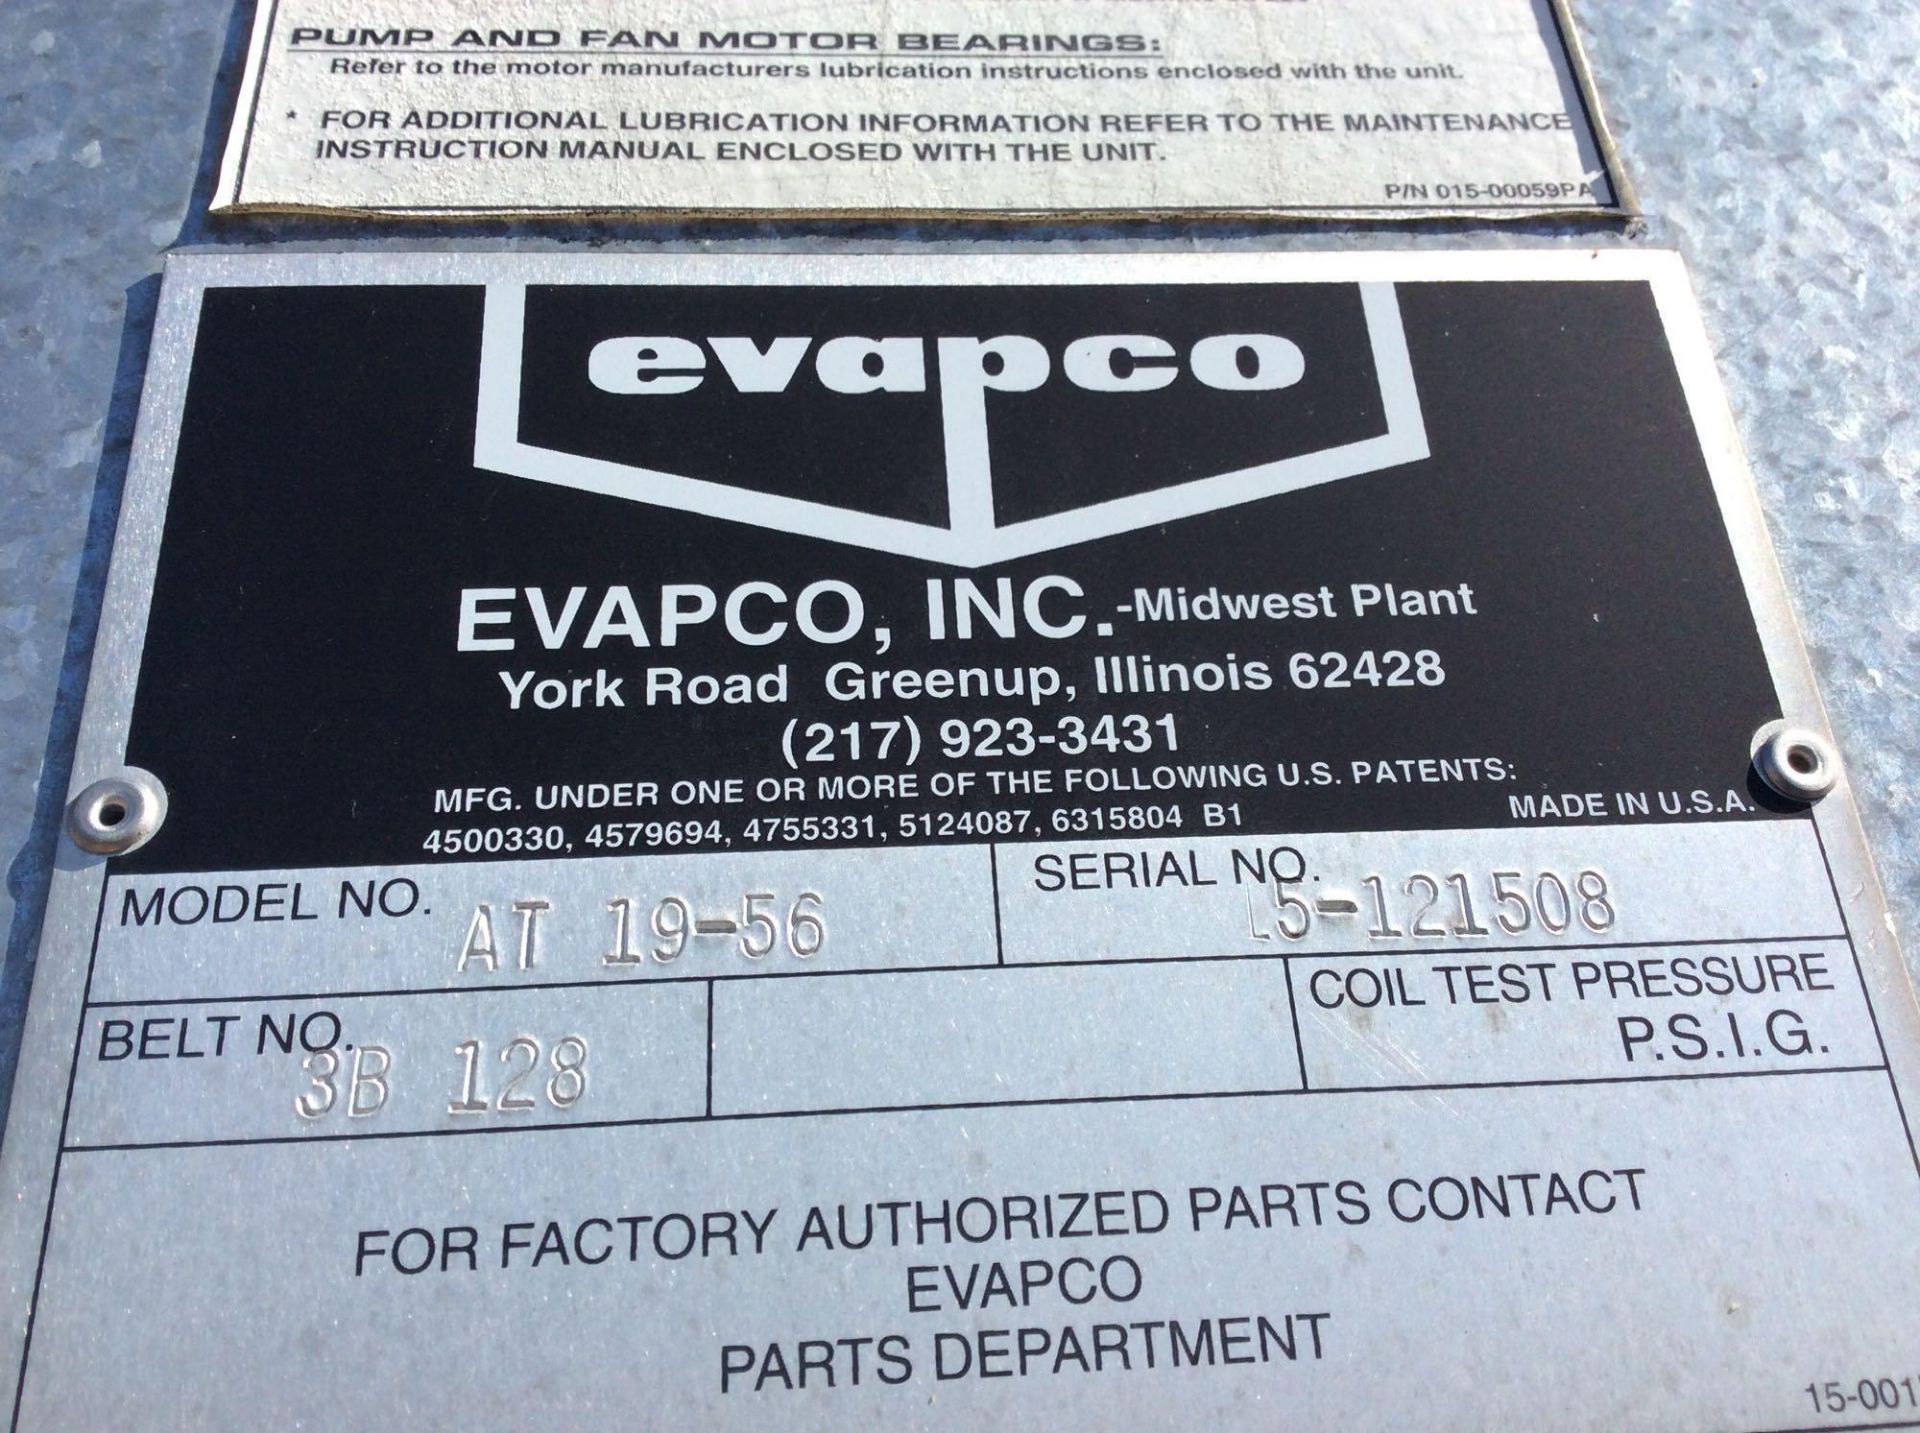 Evapco cooling tower mn AT19-56 (ON ROOF) - Image 2 of 2